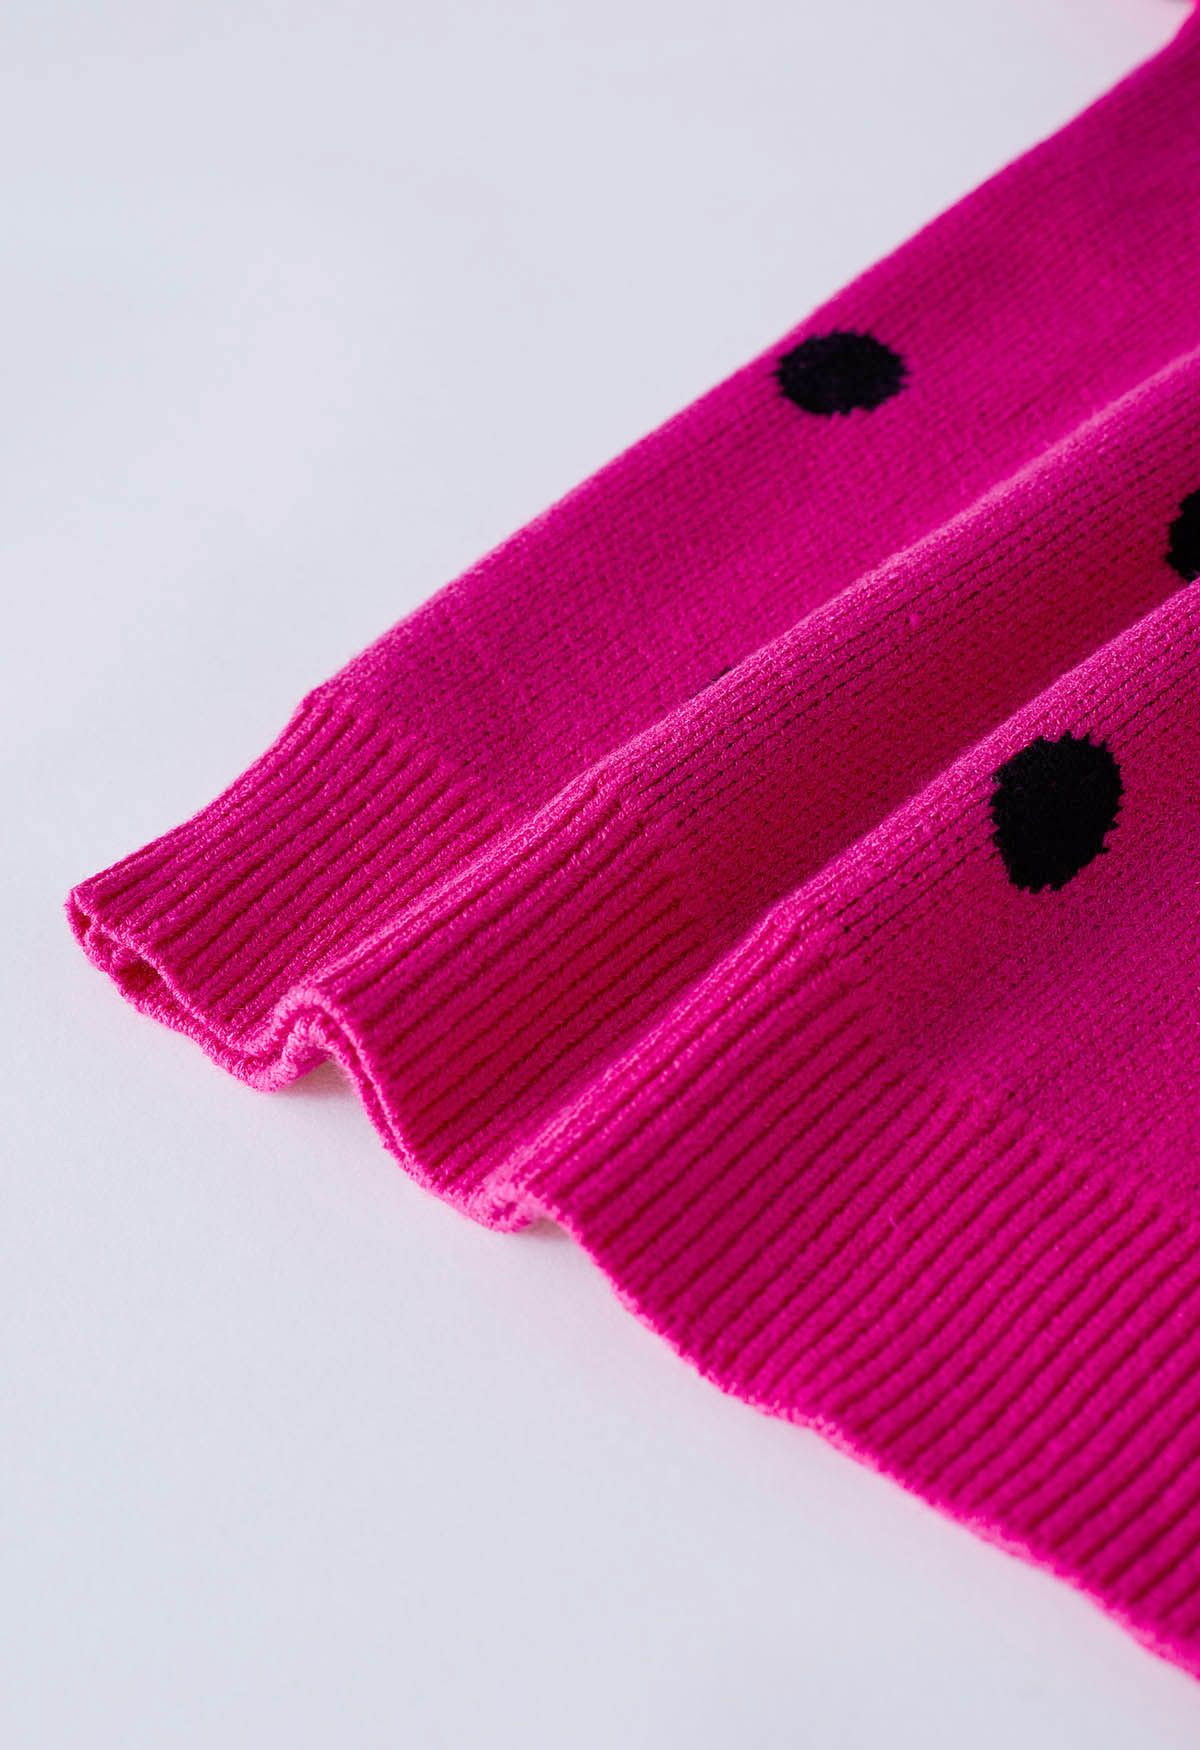 Adorable Polka Dot Mock Neck Knit Sweater in Hot Pink